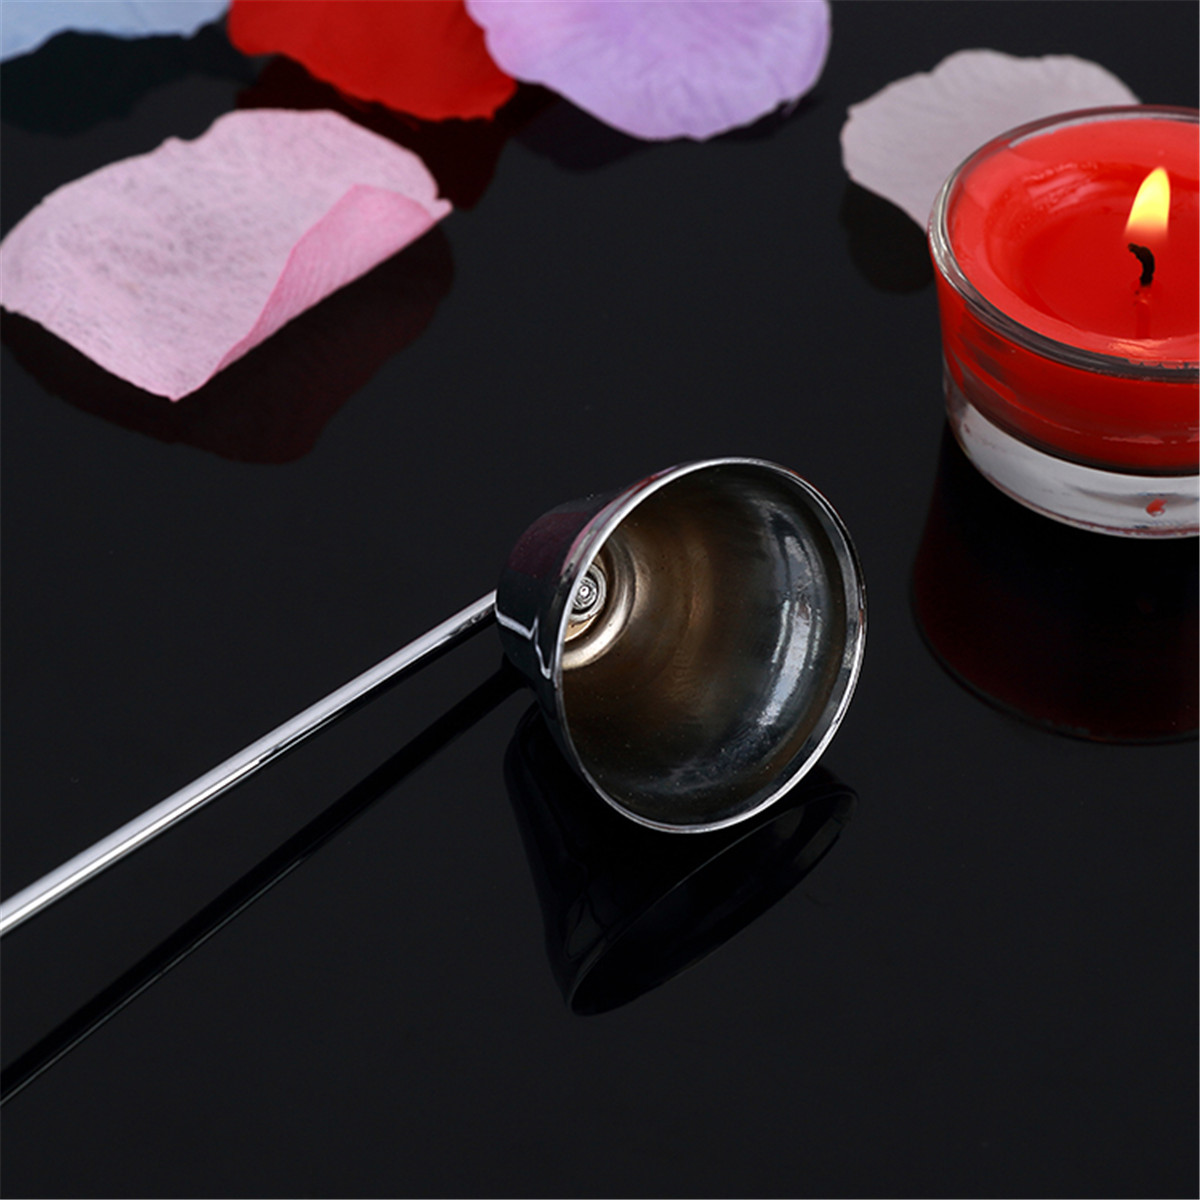 Stainless-Steel-Candle-Snuffer-Silver-Long-Extinguisher-for-Tea-Light-Candle-Tool-1252840-5